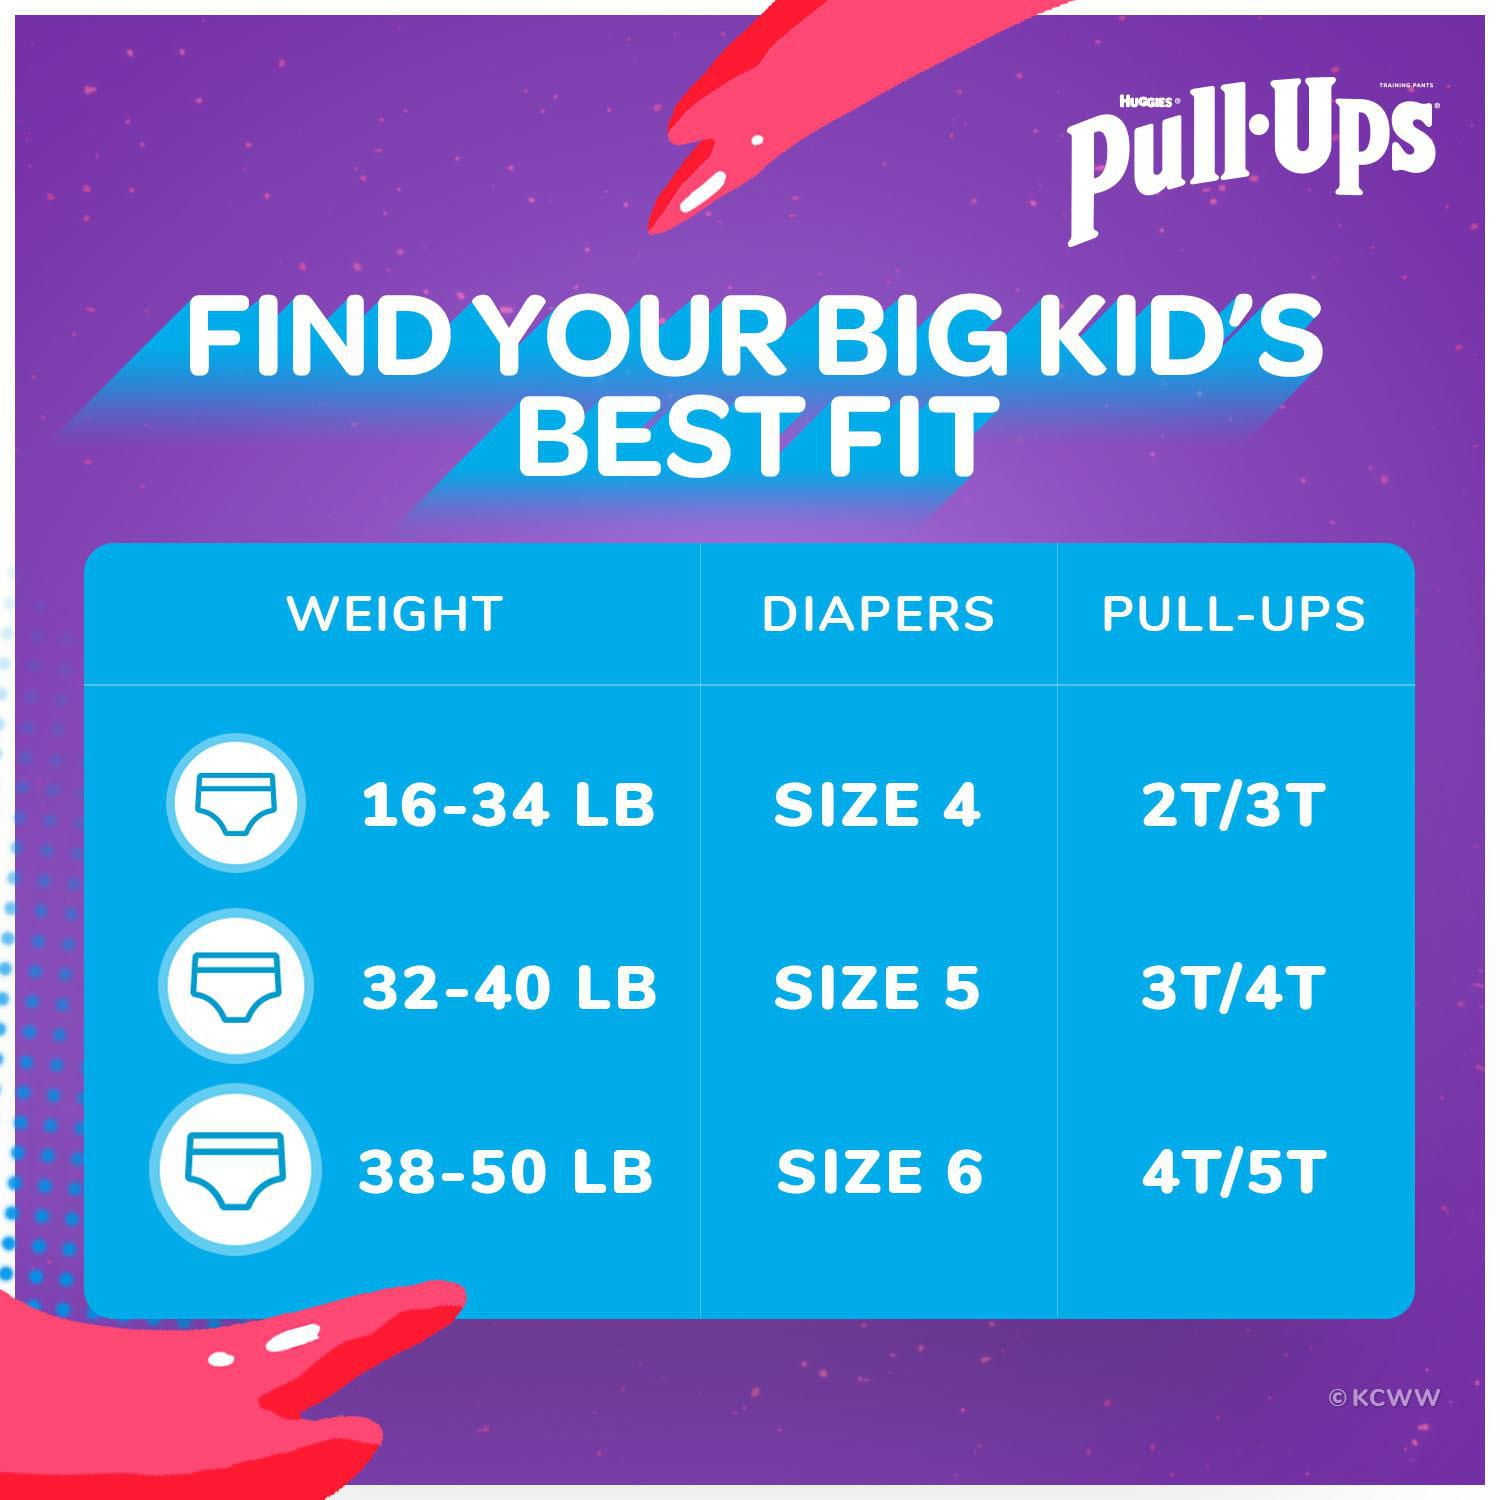 Pull Ups Night-Time Training Pants, for Boys, Size 2T-3T (18-34 lbs),  Disney Pixar Toy Story, Diapers & Training Pants